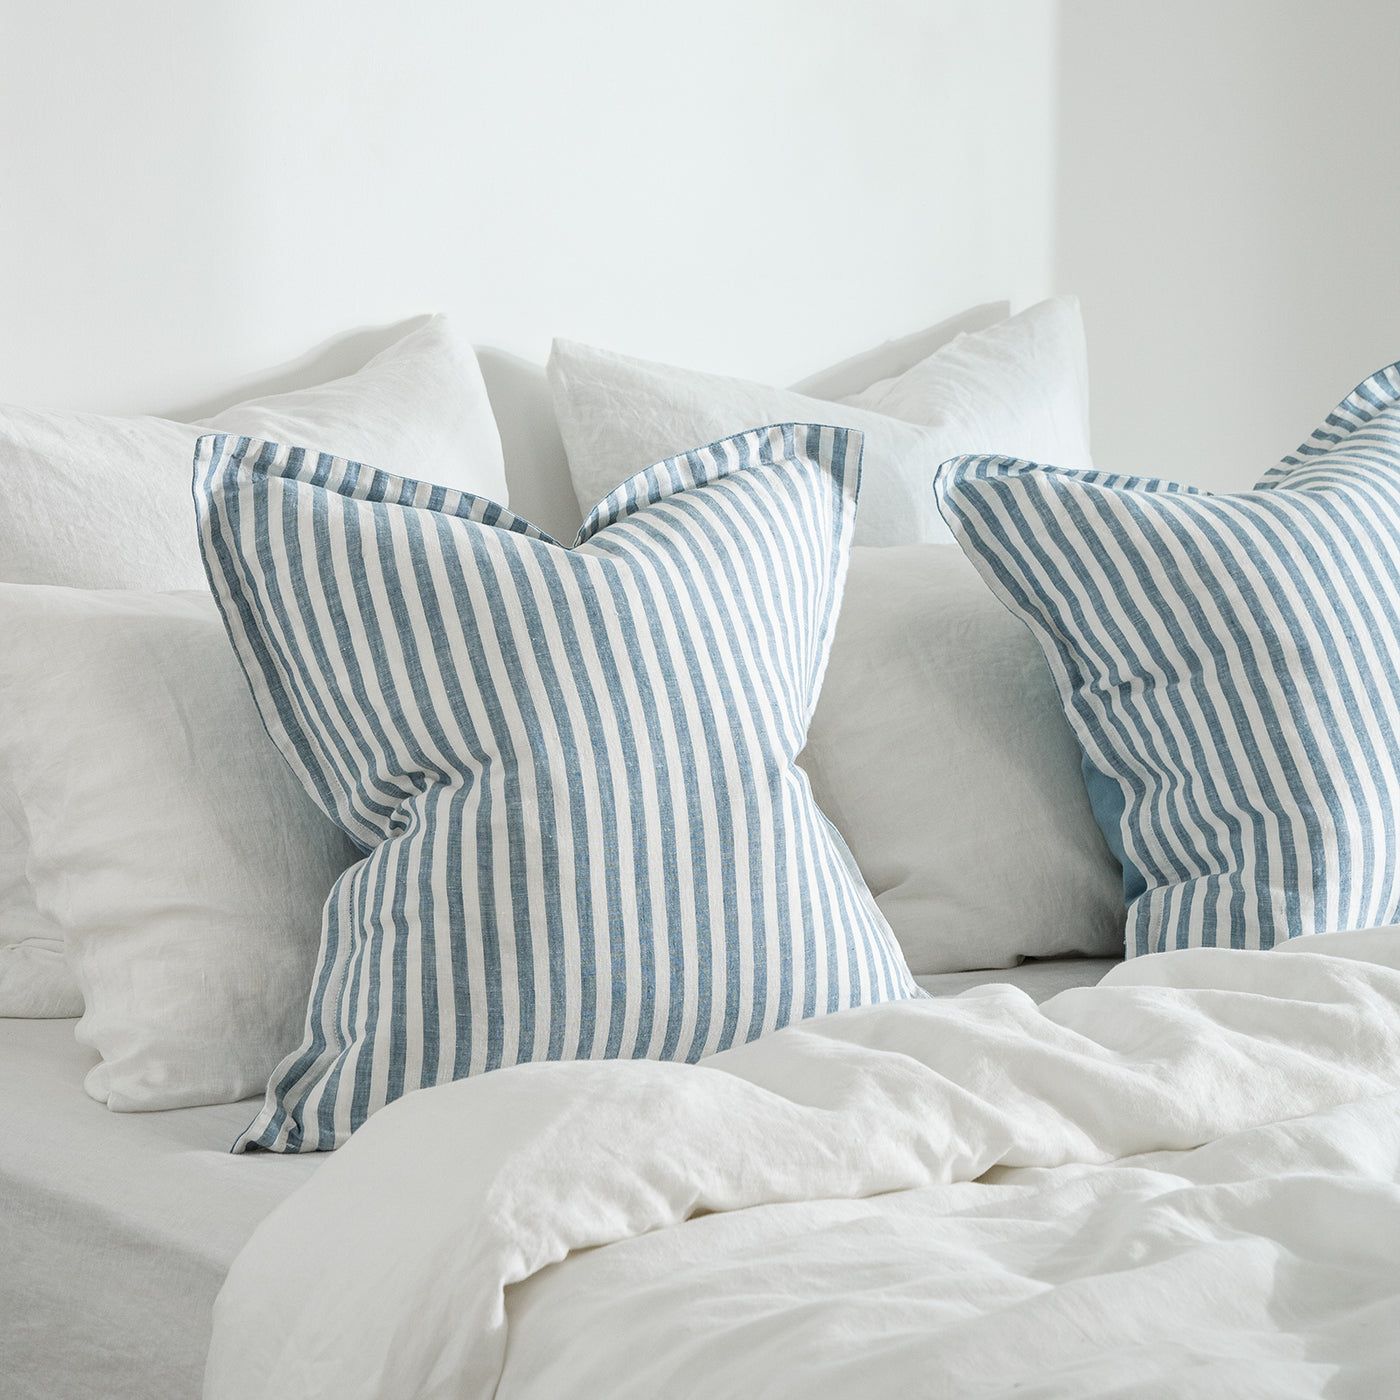 French Flax Linen Double Sided Cushion Cover in Marine Blue/Marine Blue Stripe